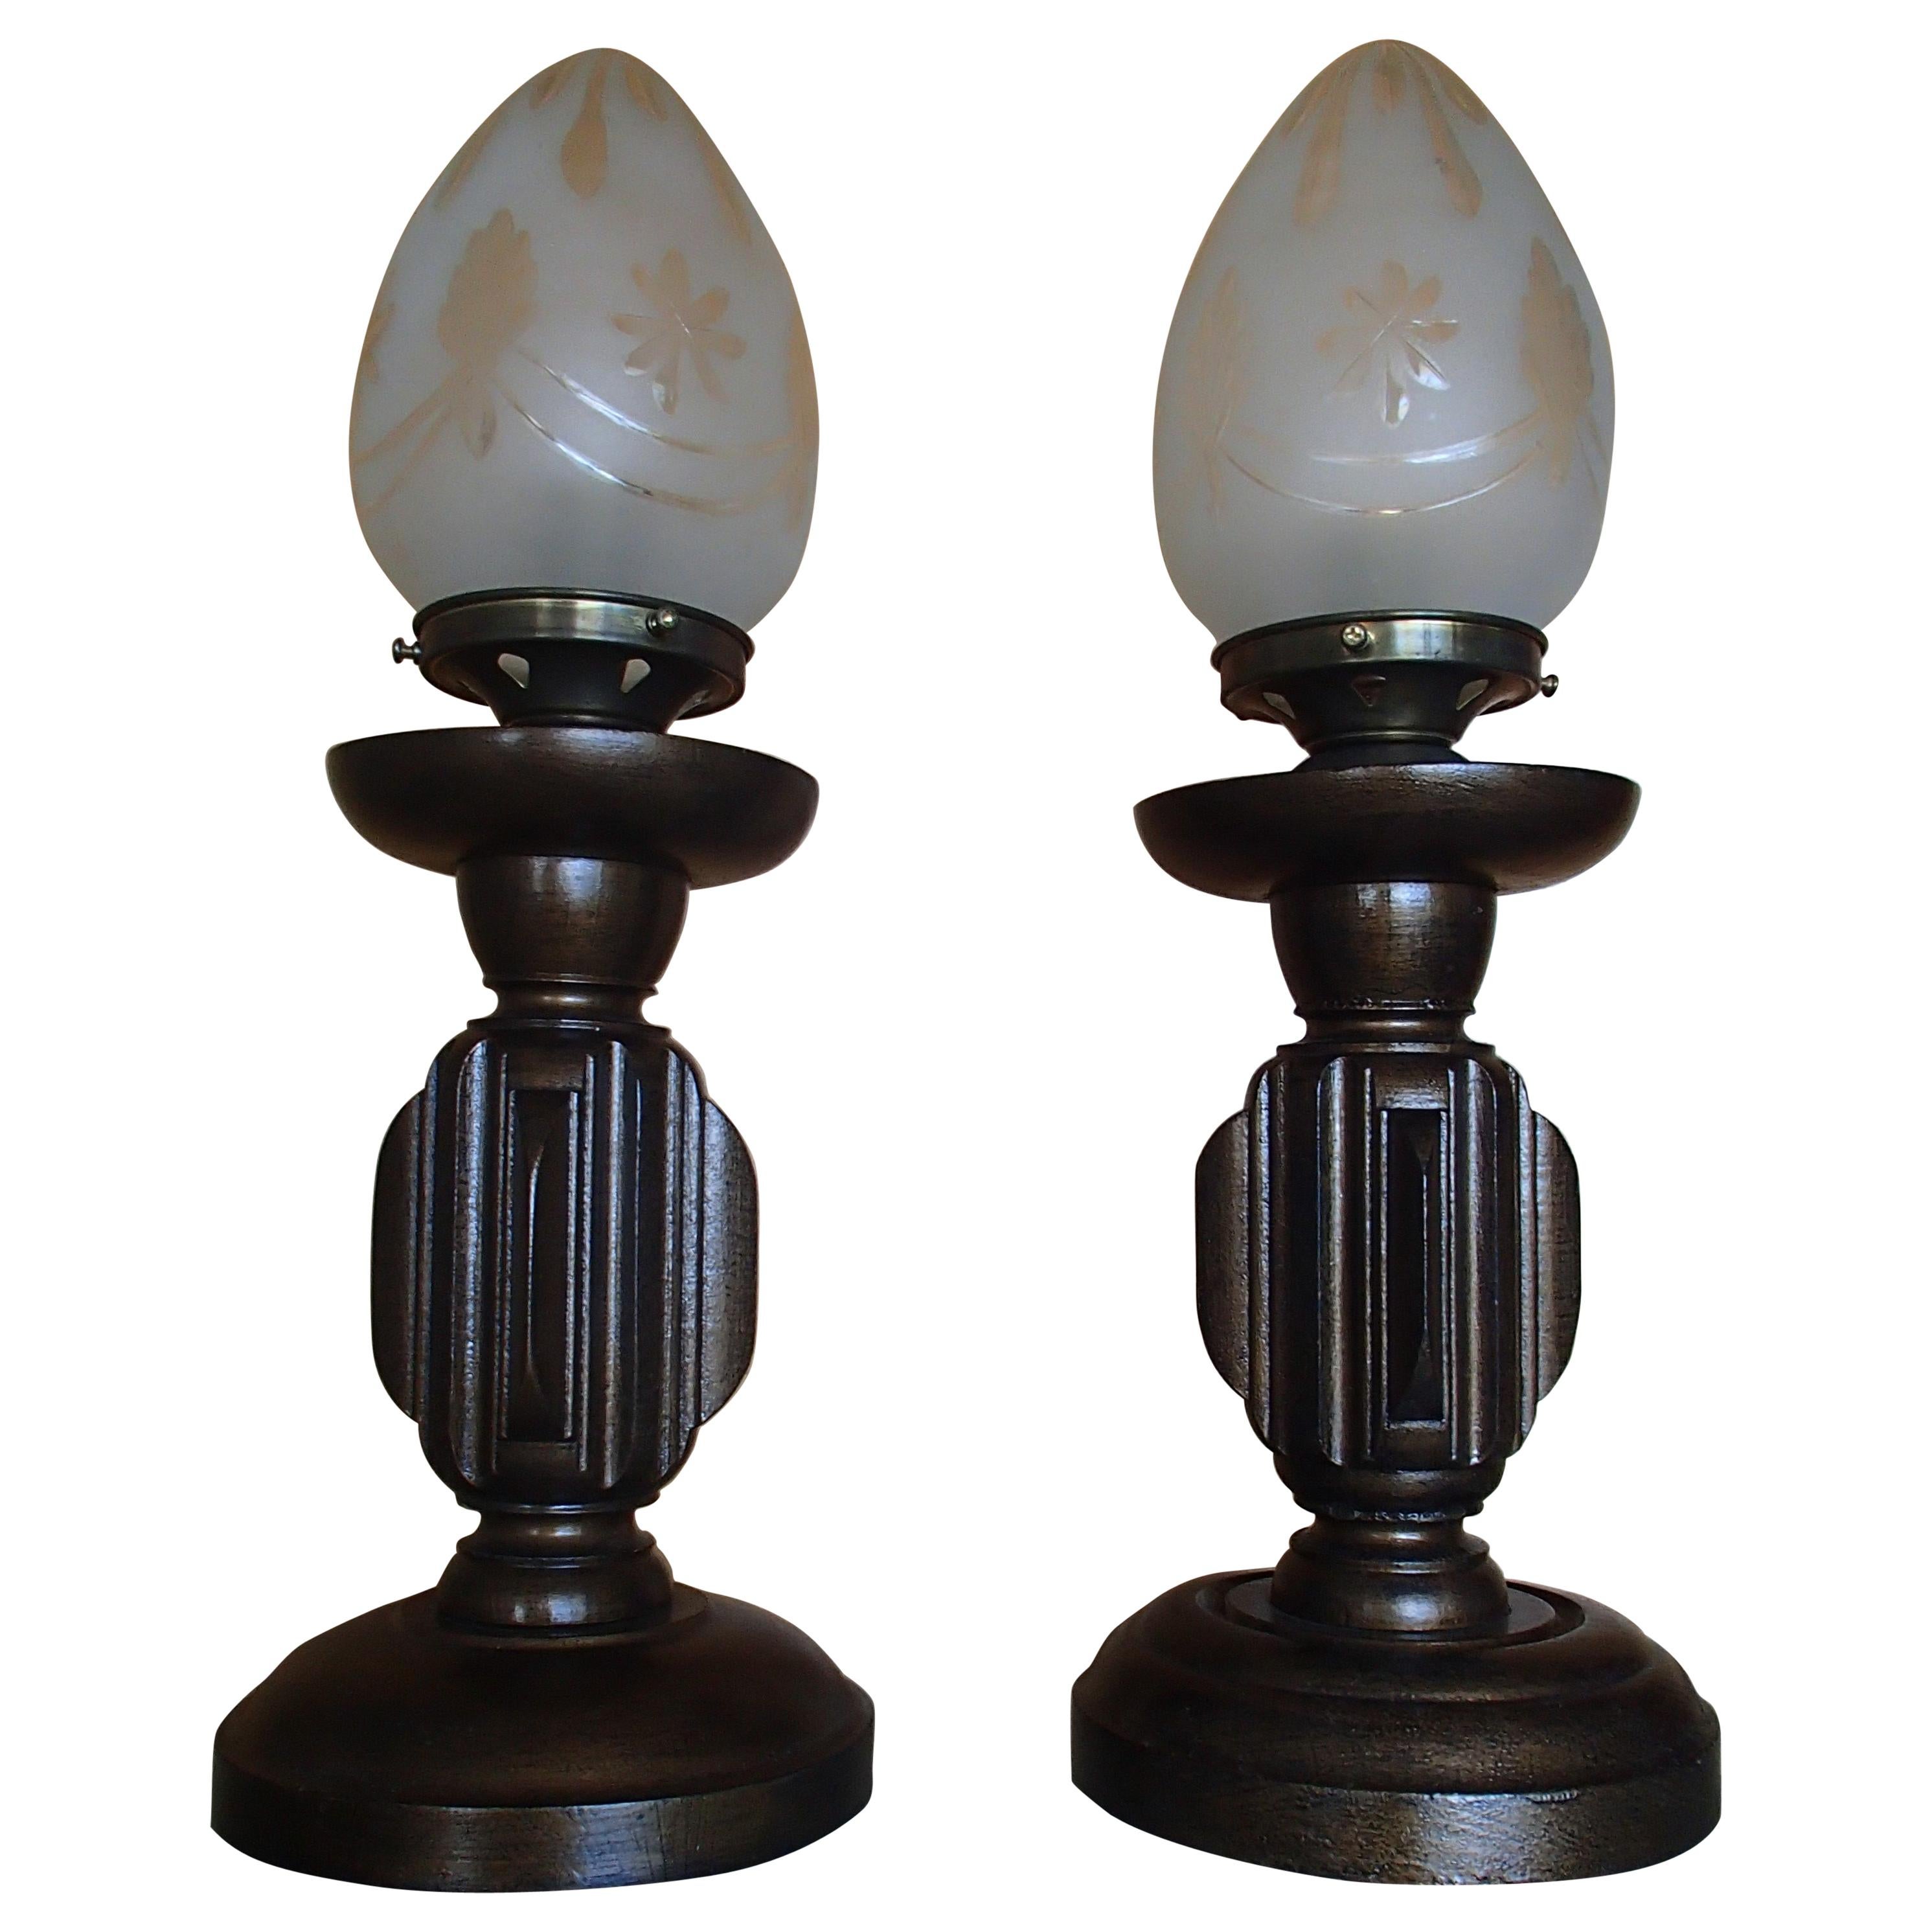 Pair of Bronzed Wooden Table Lamps Engraved Glass Shades